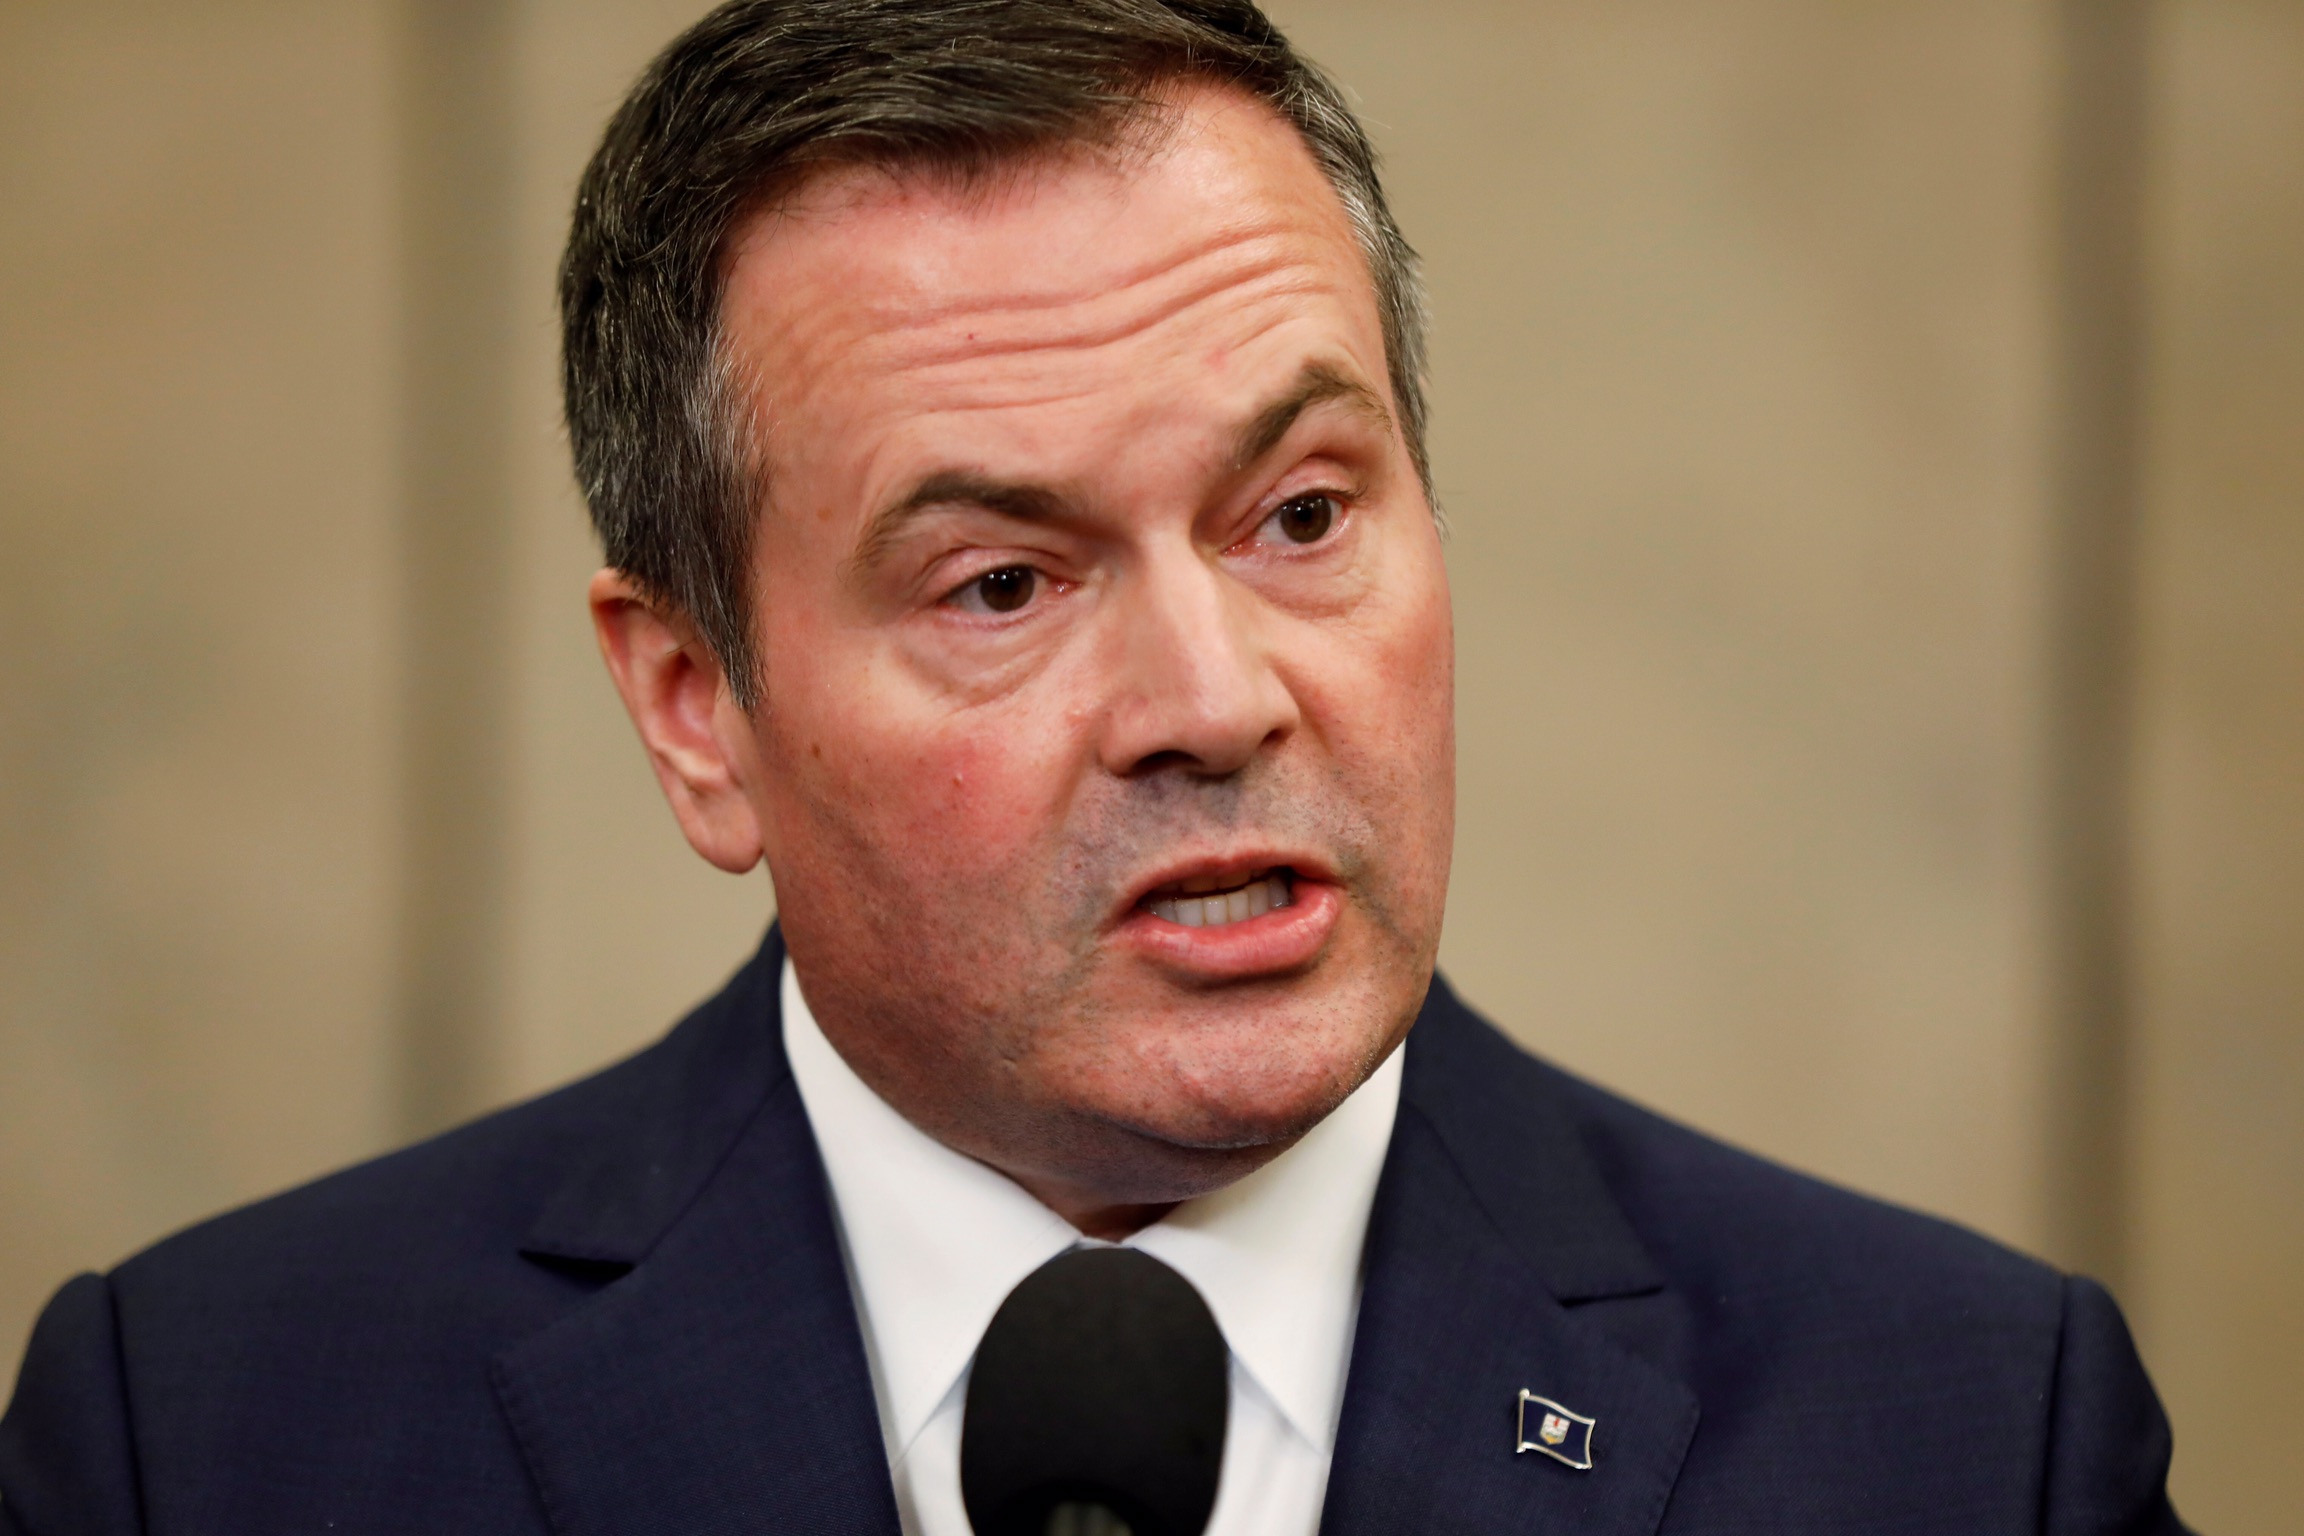 FILE PHOTO: Alberta Premier Jason Kenney speaks during a news conference after meeting with Canada's Prime Minister Justin Trudeau on Parliament Hill in Ottawa, Ontario, Canada December 10, 2019. REUTERS/Blair Gable